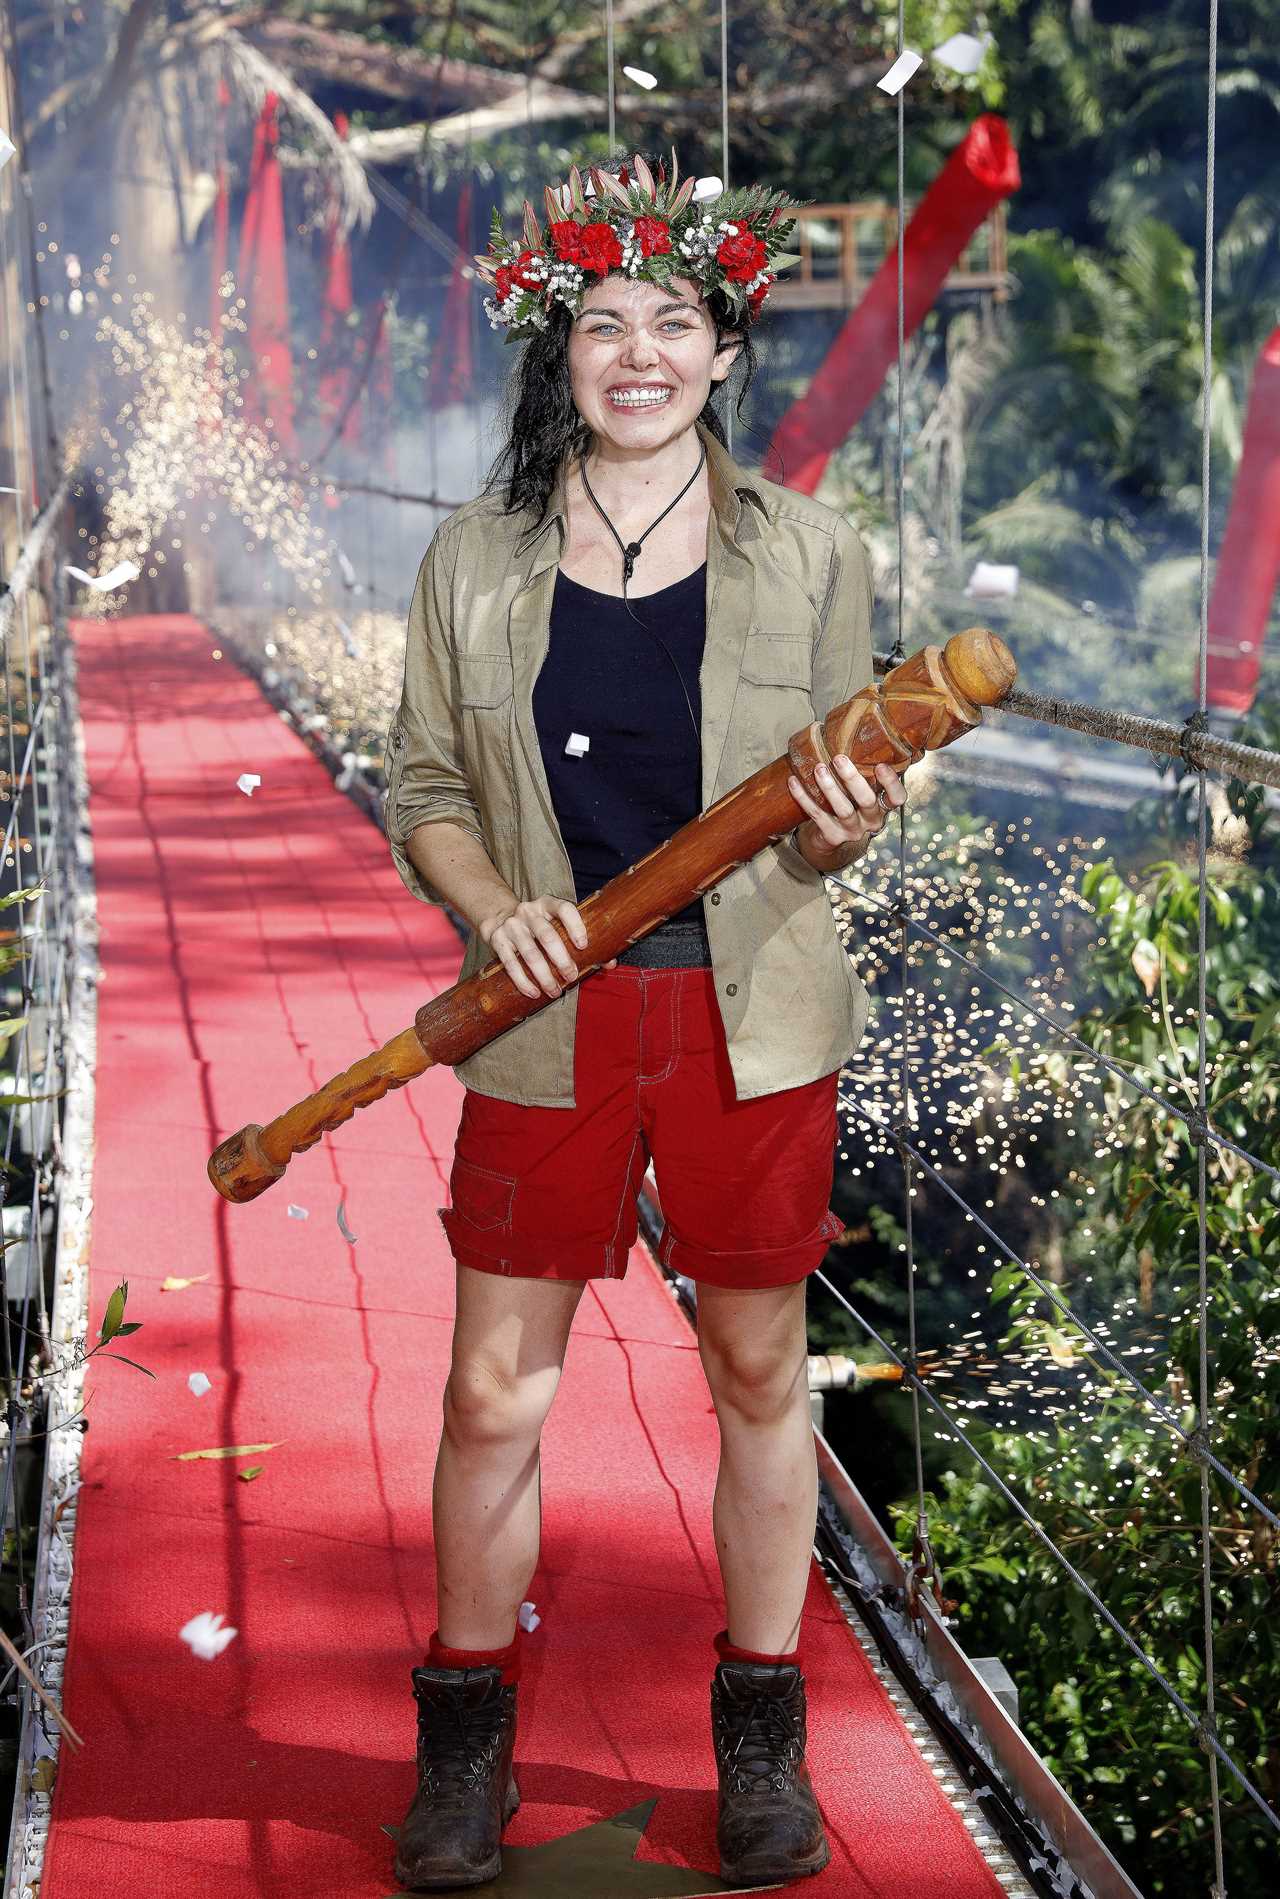 I’m A Celebrity winners list: From Jacquline Jossa to Harry Redknapp and Stacey Solomon